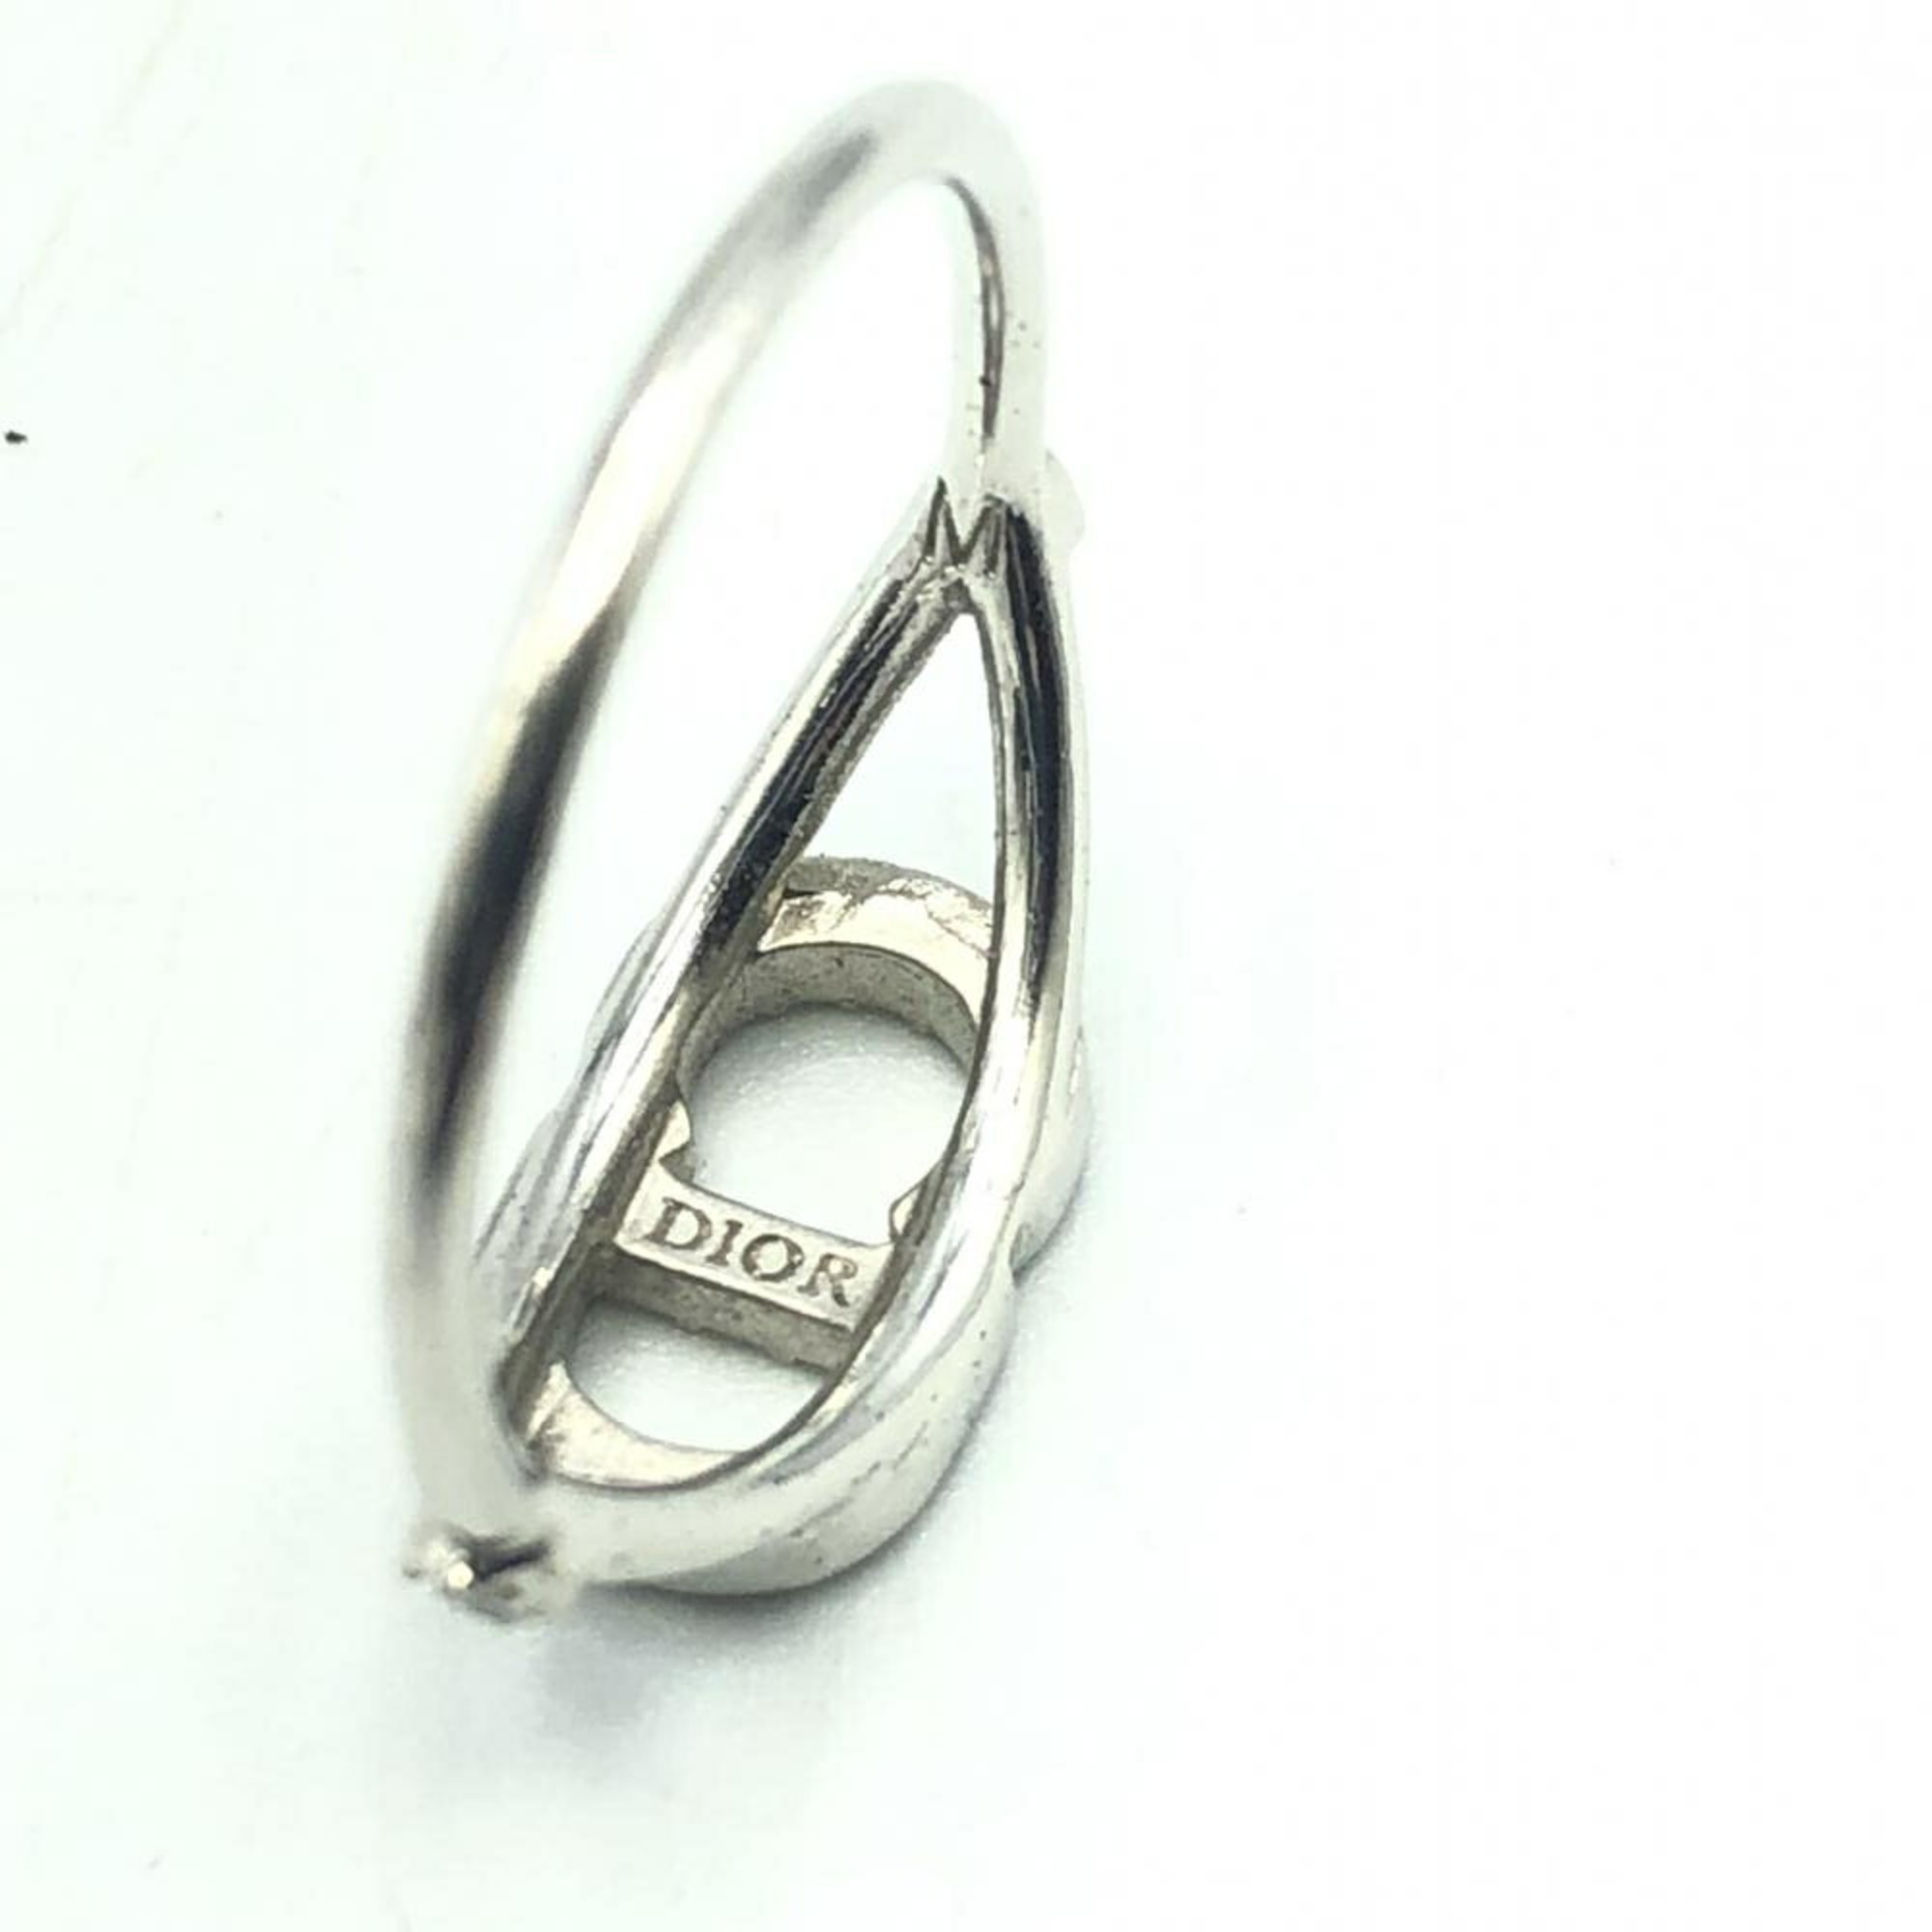 Christian Dior Clair D Lune Ring Silver Size M